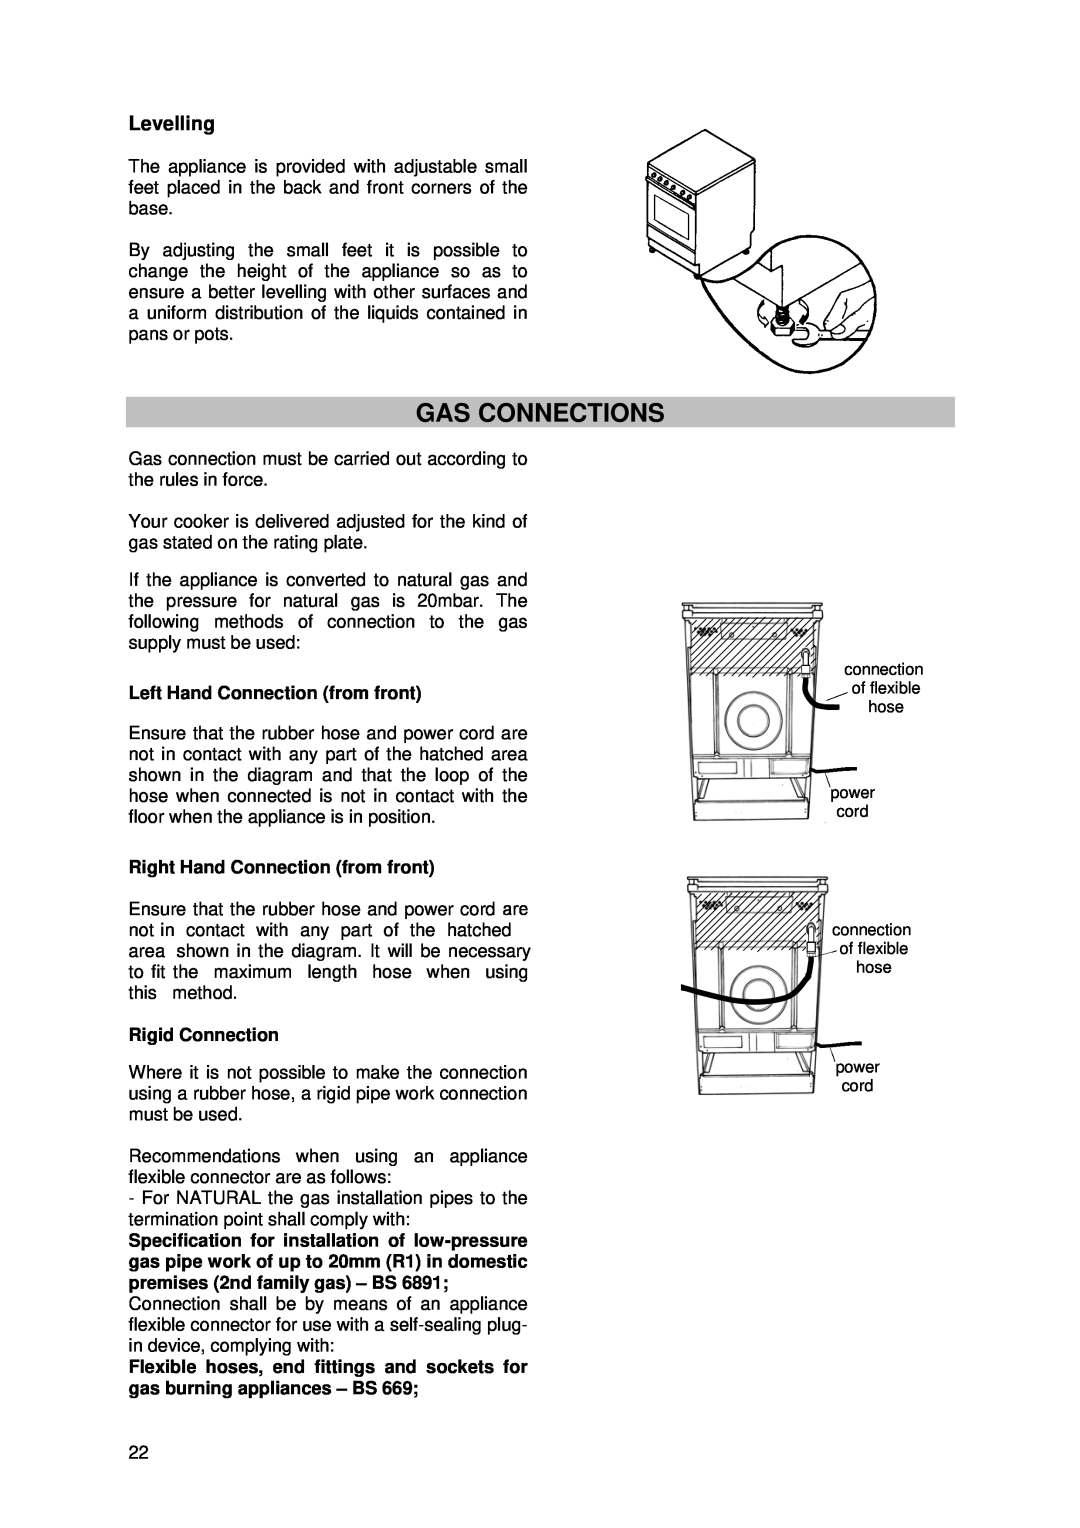 Tricity Bendix SIG 233/1 installation instructions Gas Connections, Levelling 